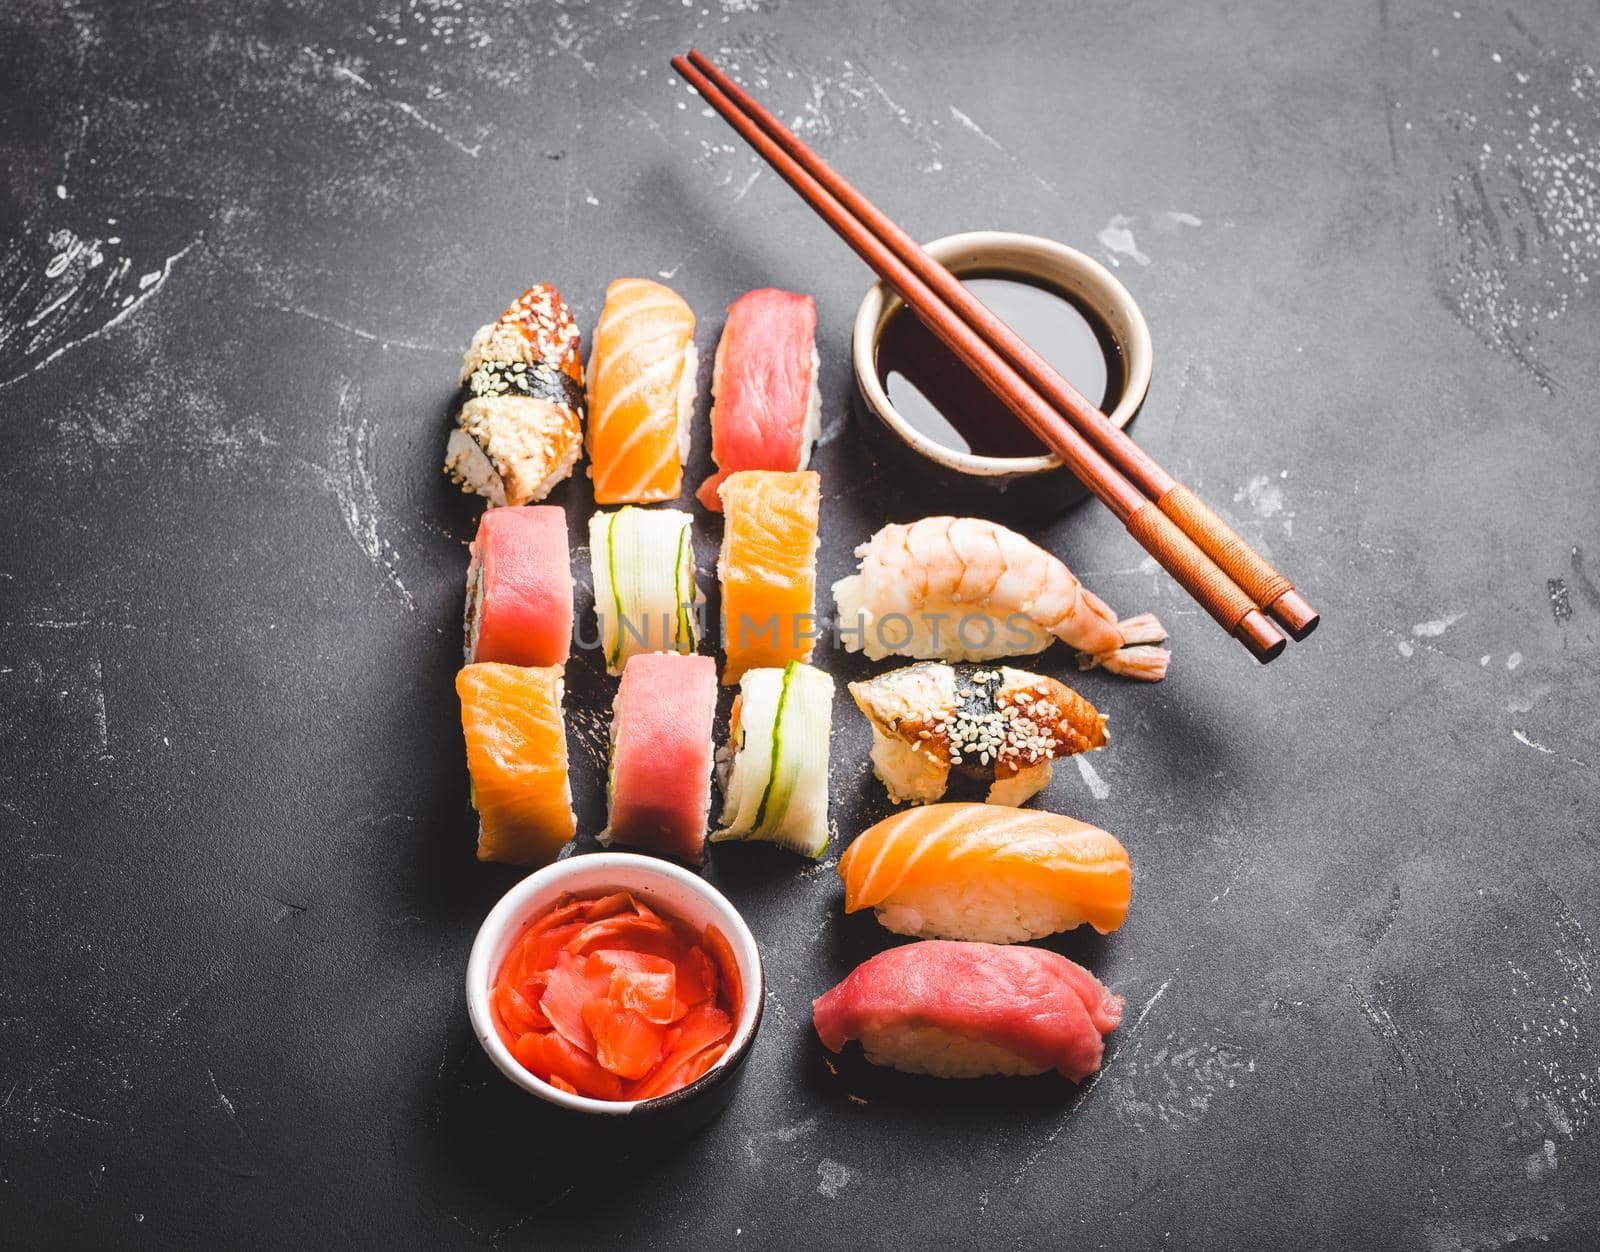 Top view of assorted mixed Japanese sushi set with rolls, nigiri, soy sauce, ginger, chopsticks on black concrete background. Asian dinner or lunch concept.